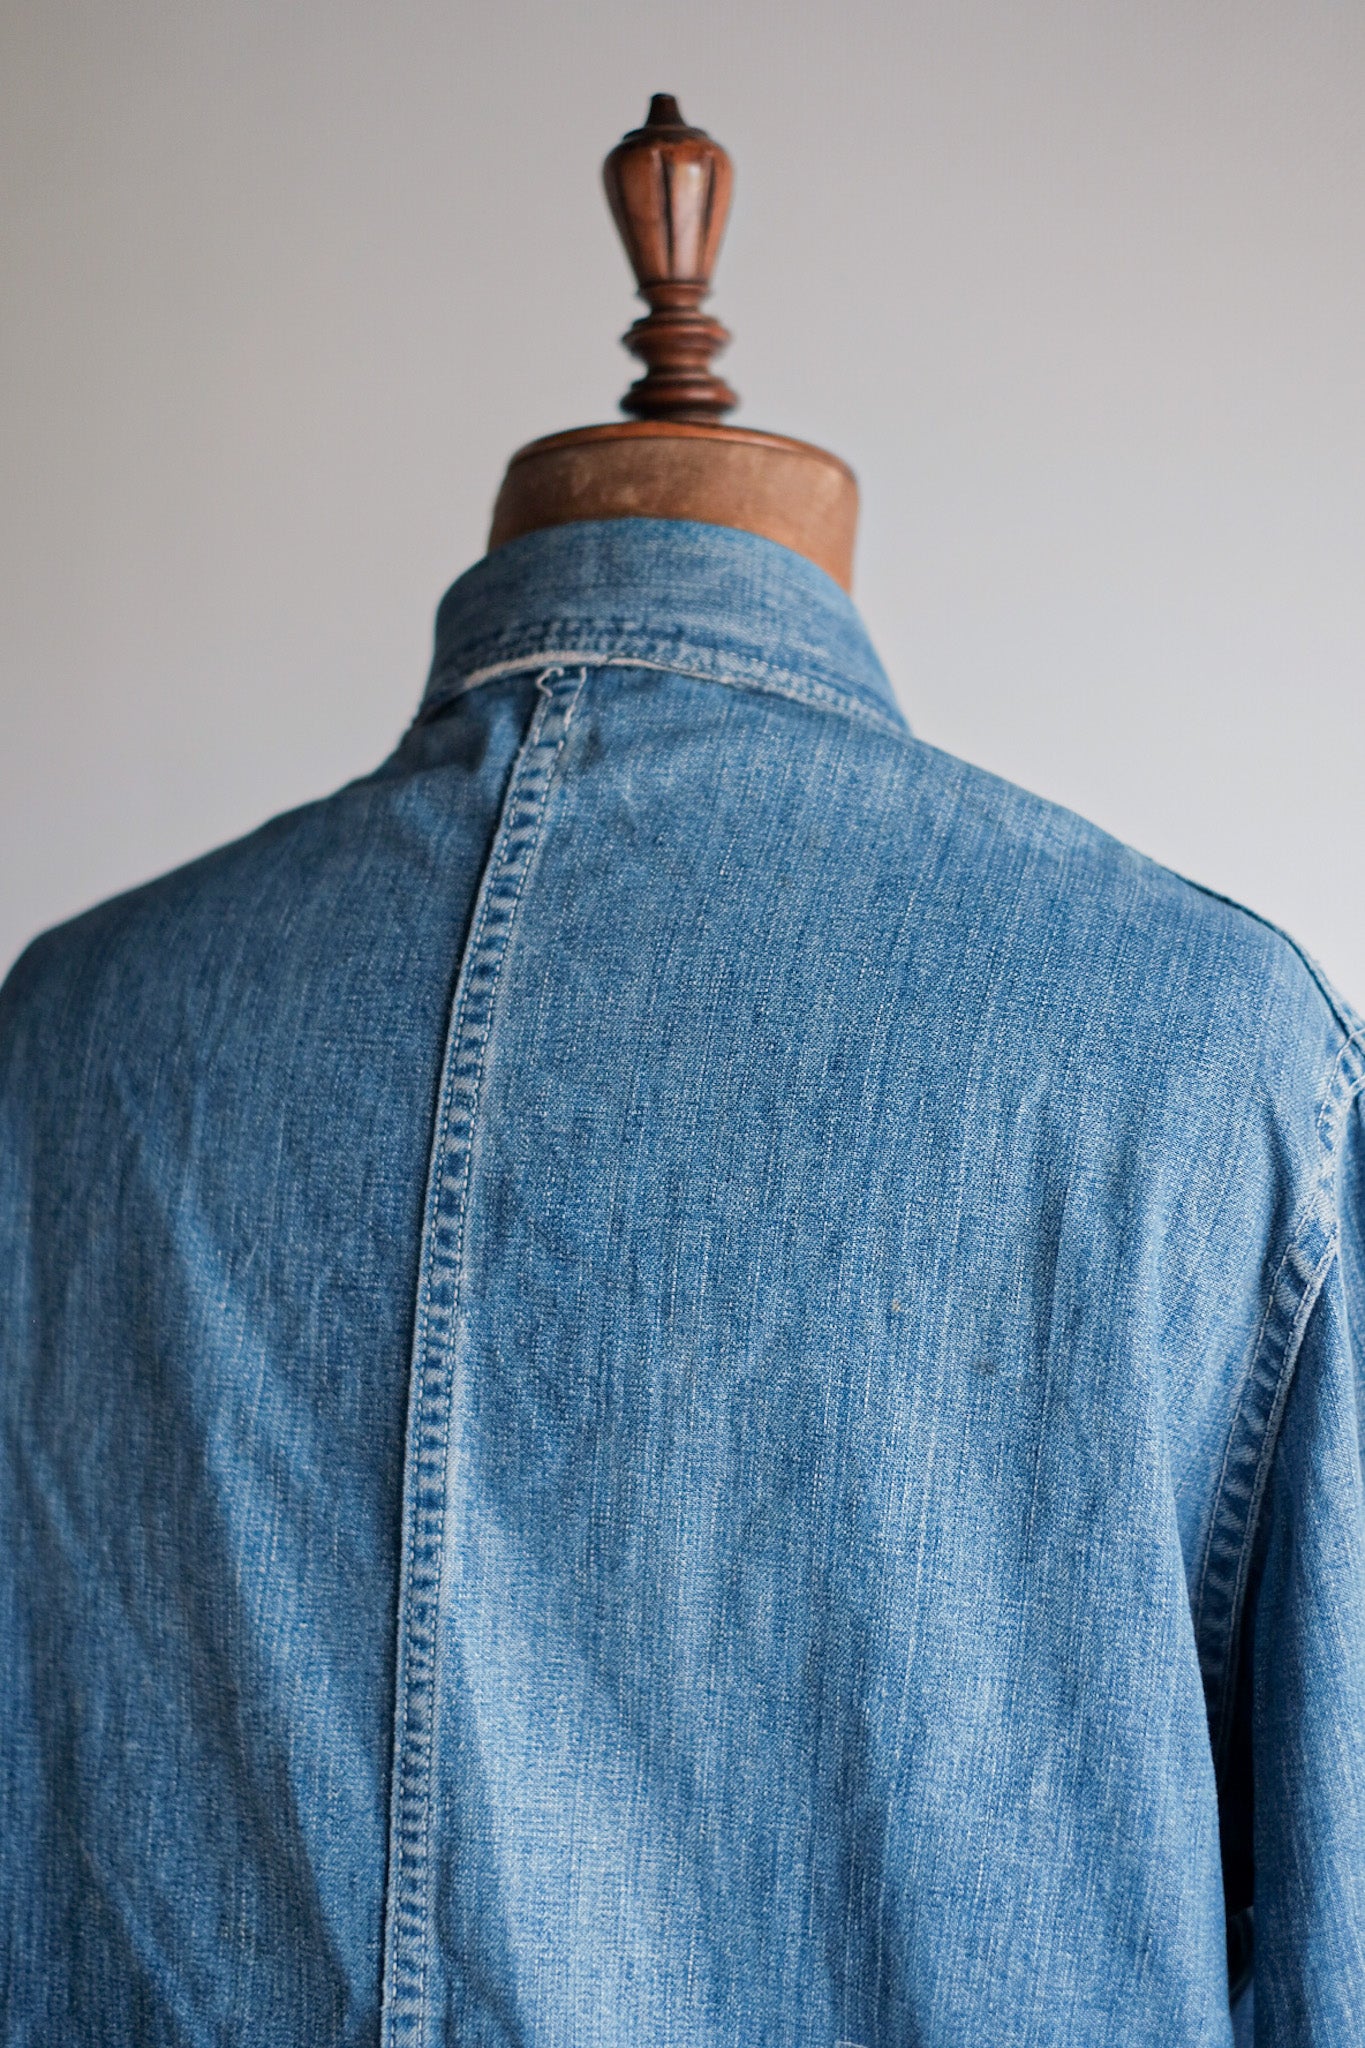 【~40's】American Vintage Denim Coverall "TEST by Rice-Stix"